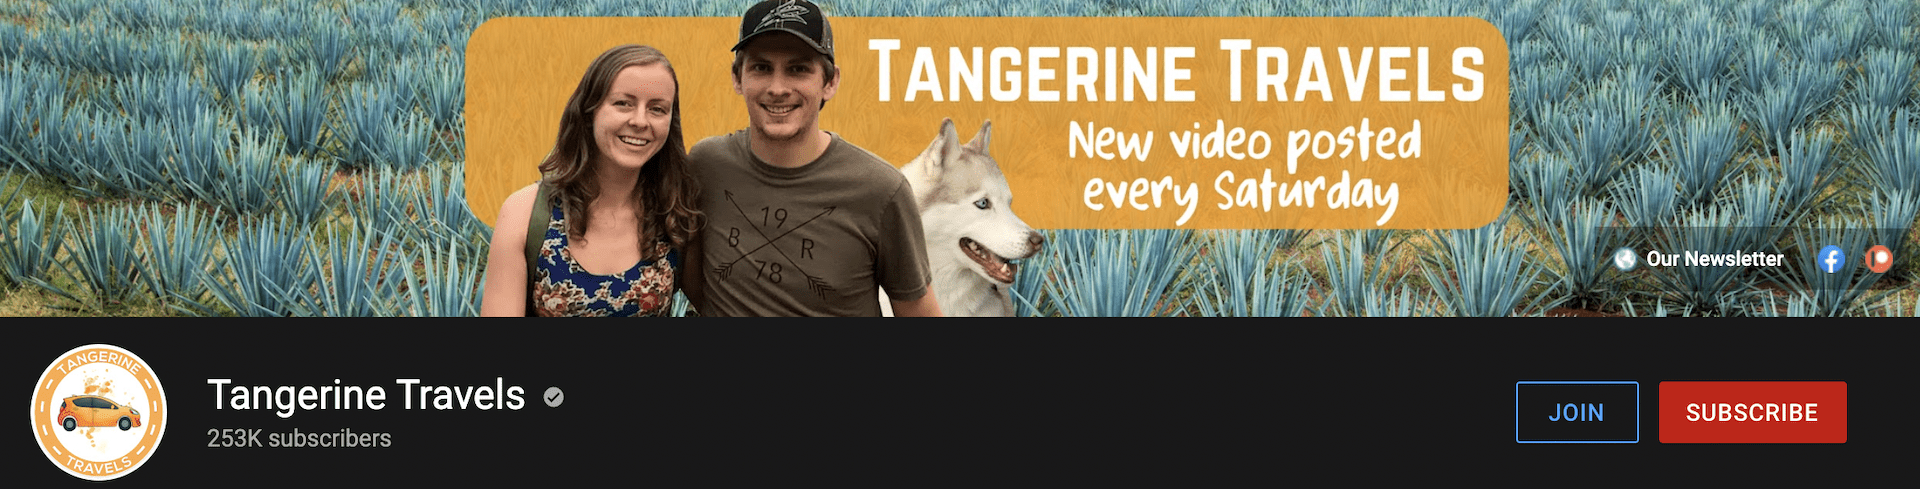 Tangerine Travels Youtube Channel